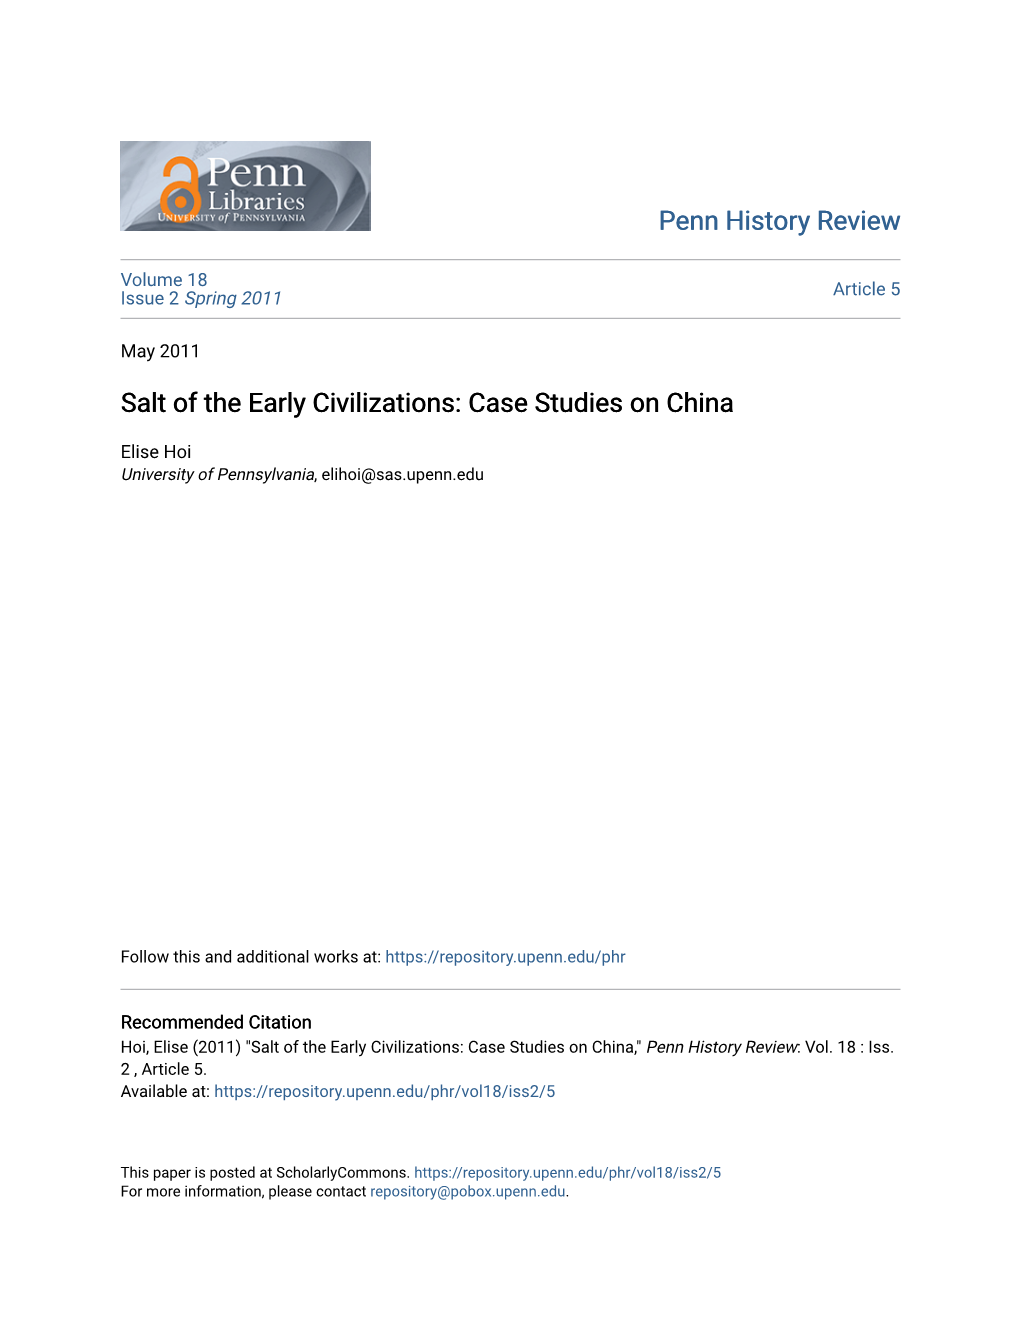 Salt of the Early Civilizations: Case Studies on China